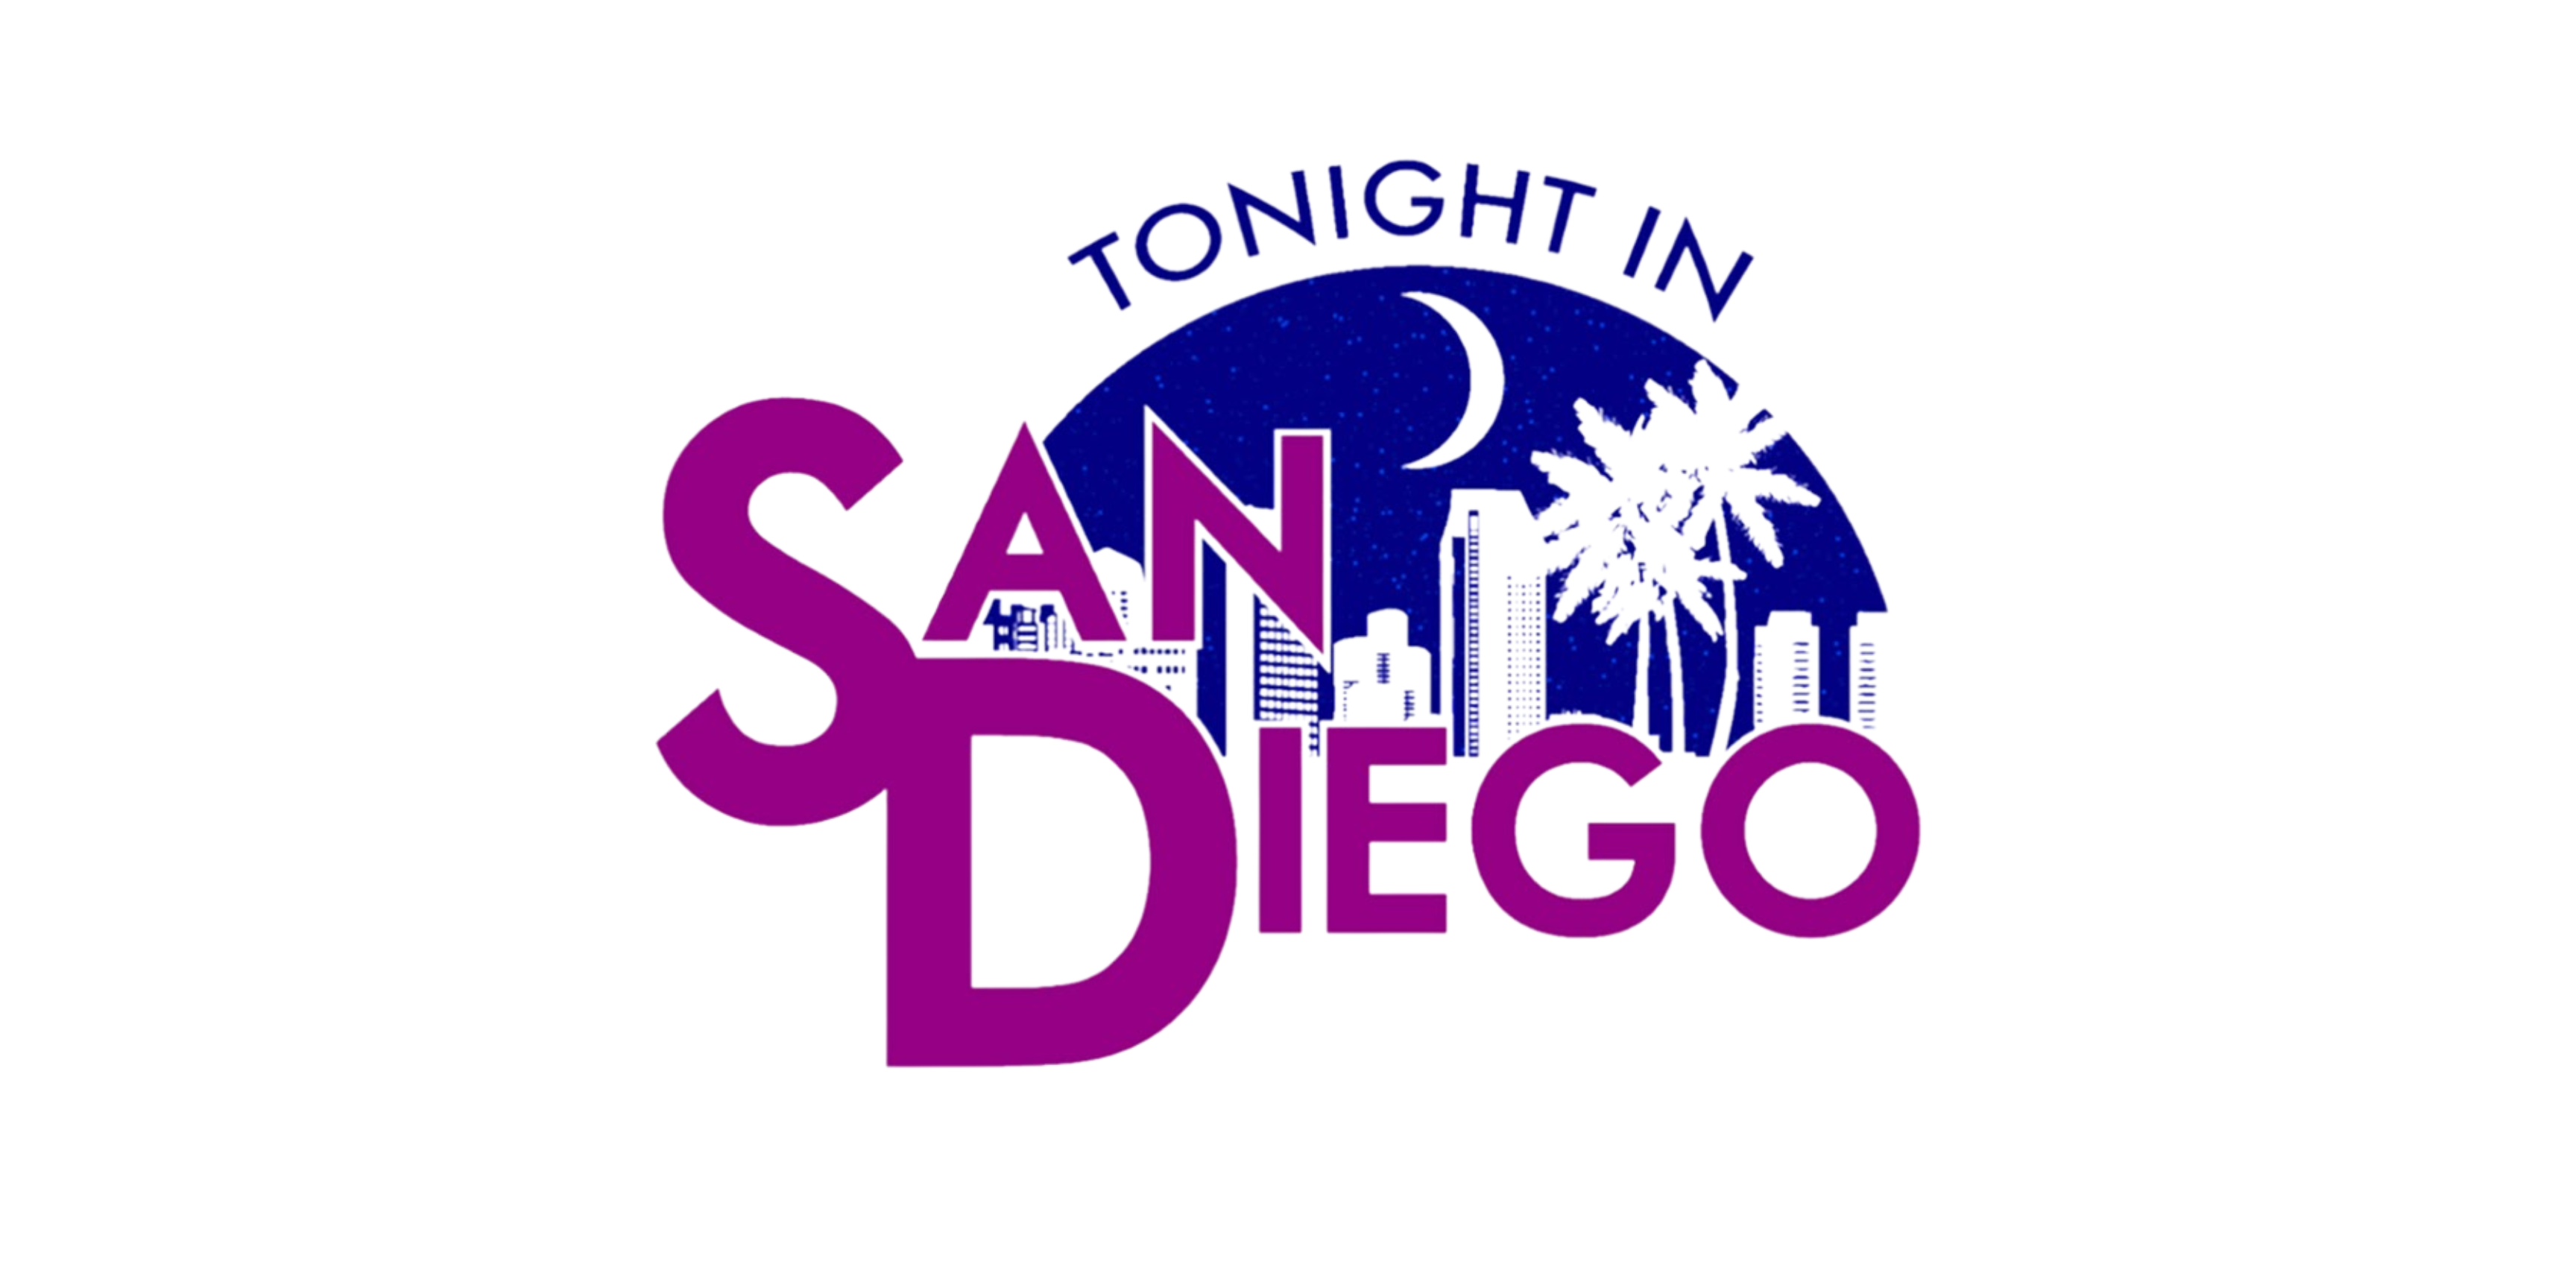 Image with text that says "Tonight in San Diego."